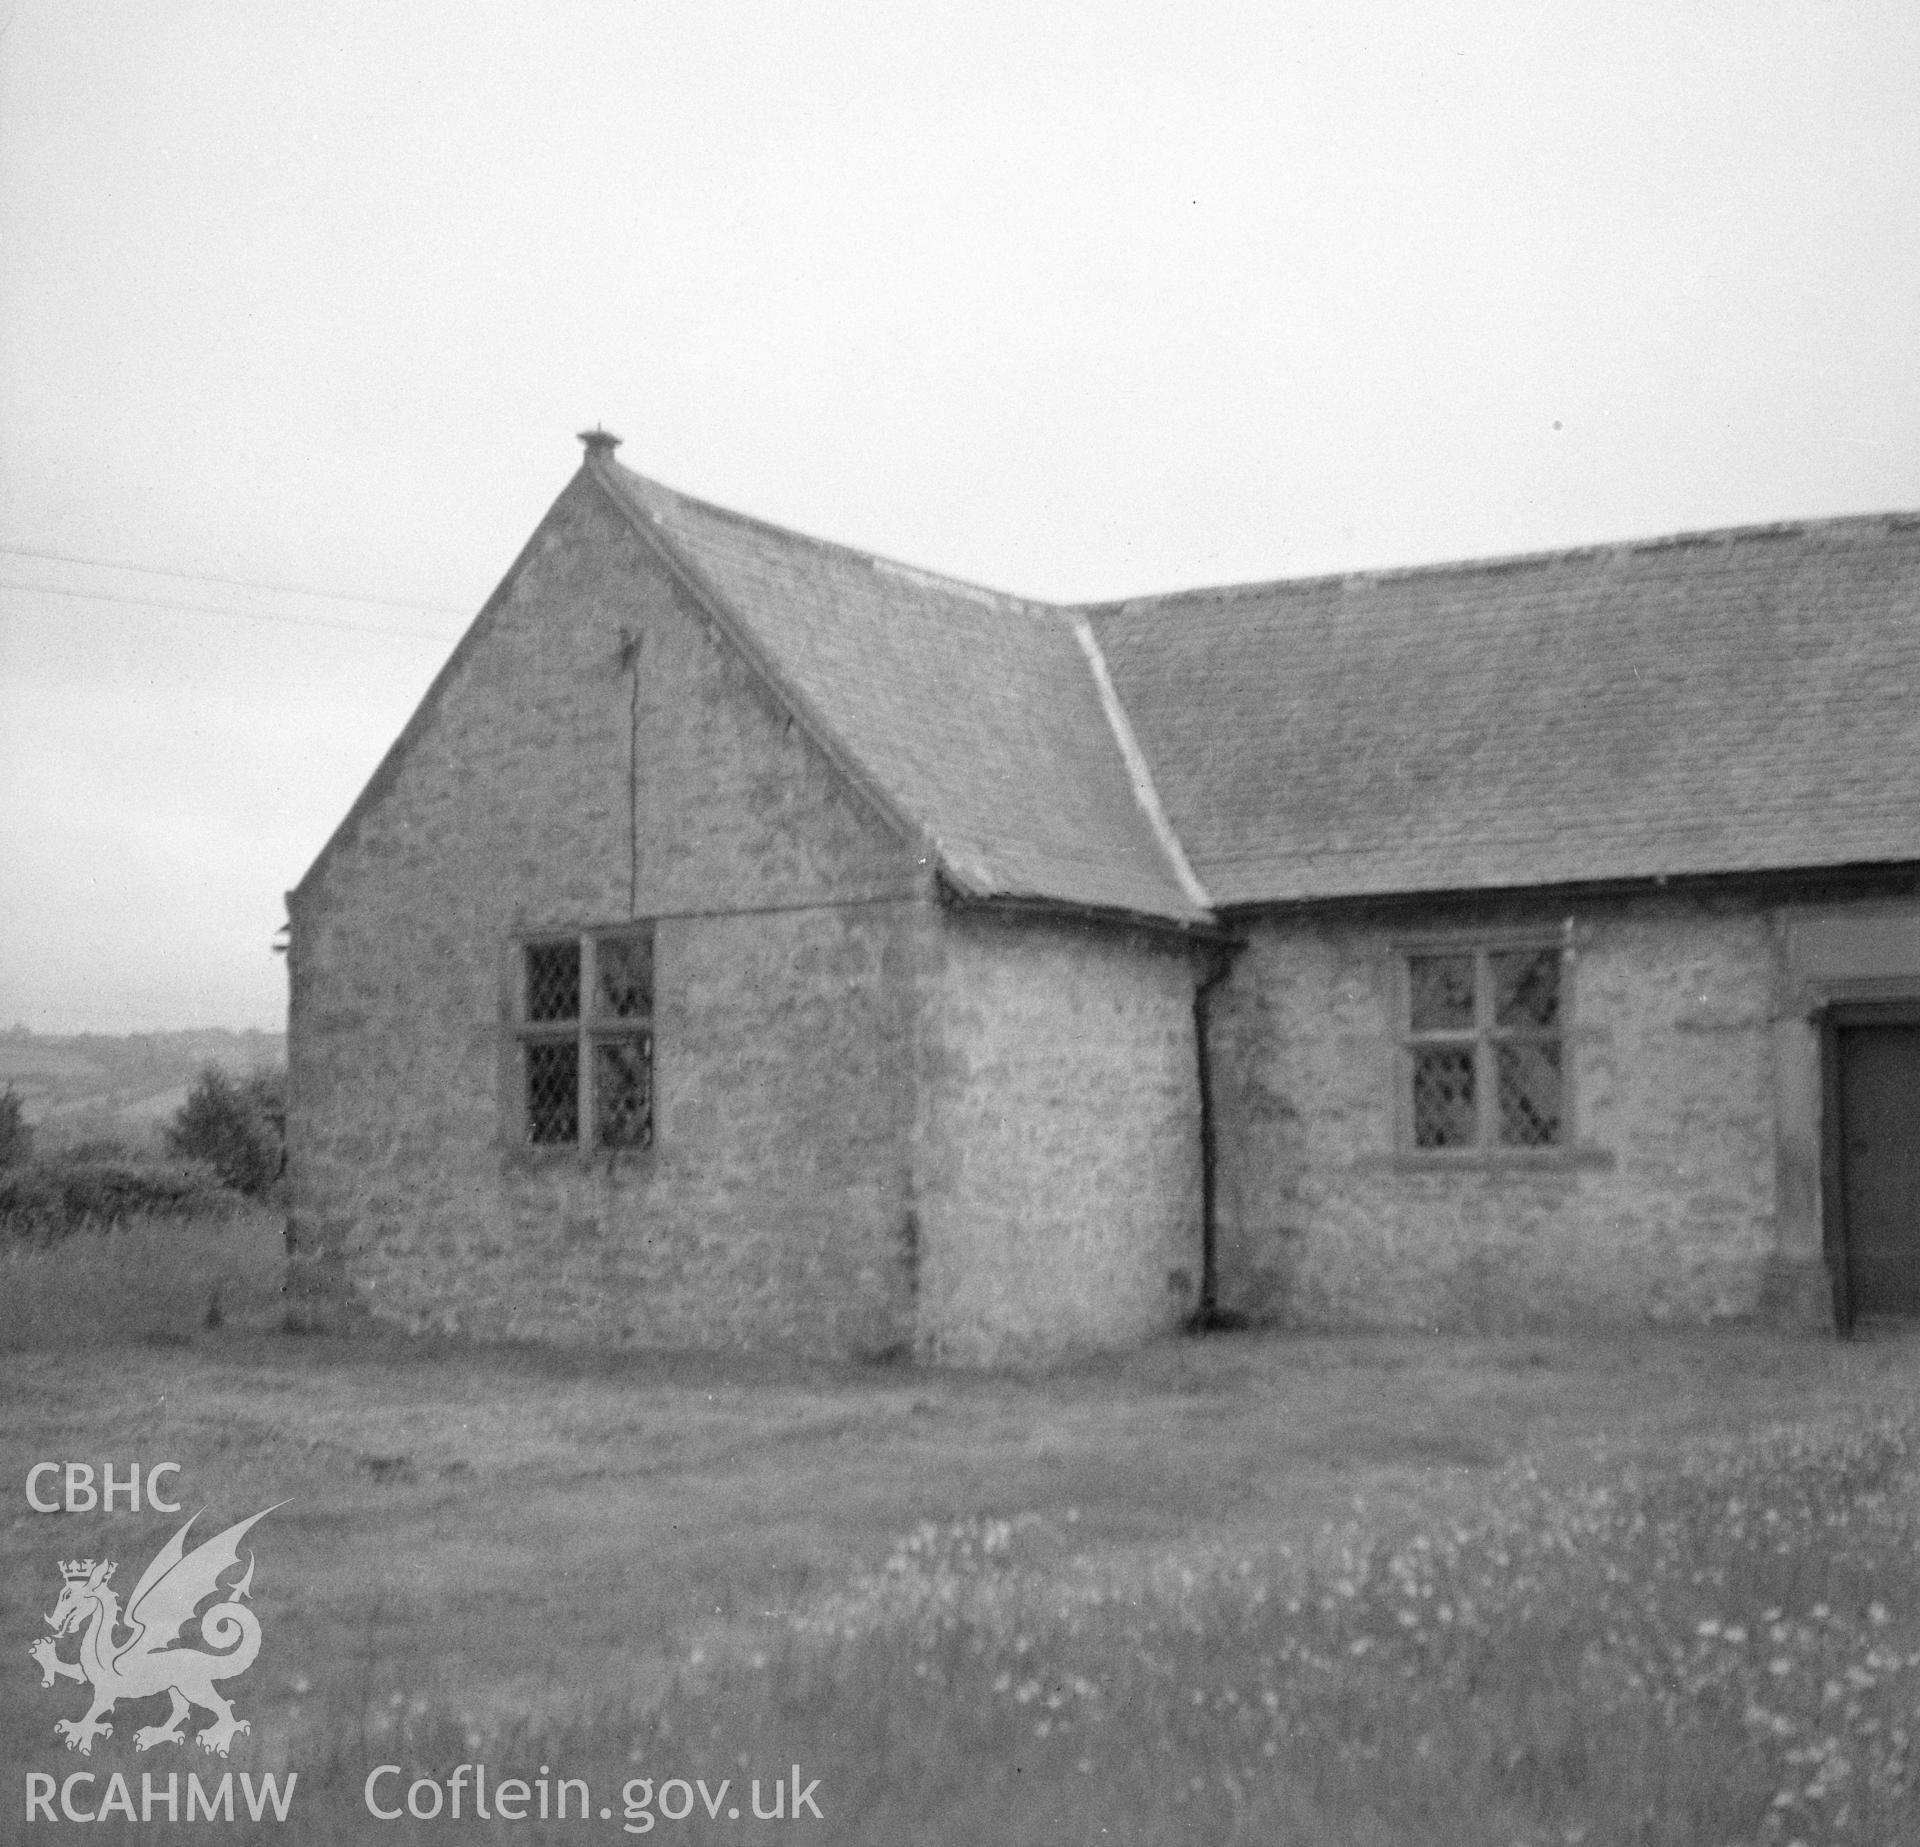 Digital copy of a nitrate negative showing exterior view of Jesus Chapel, Denbighshire.